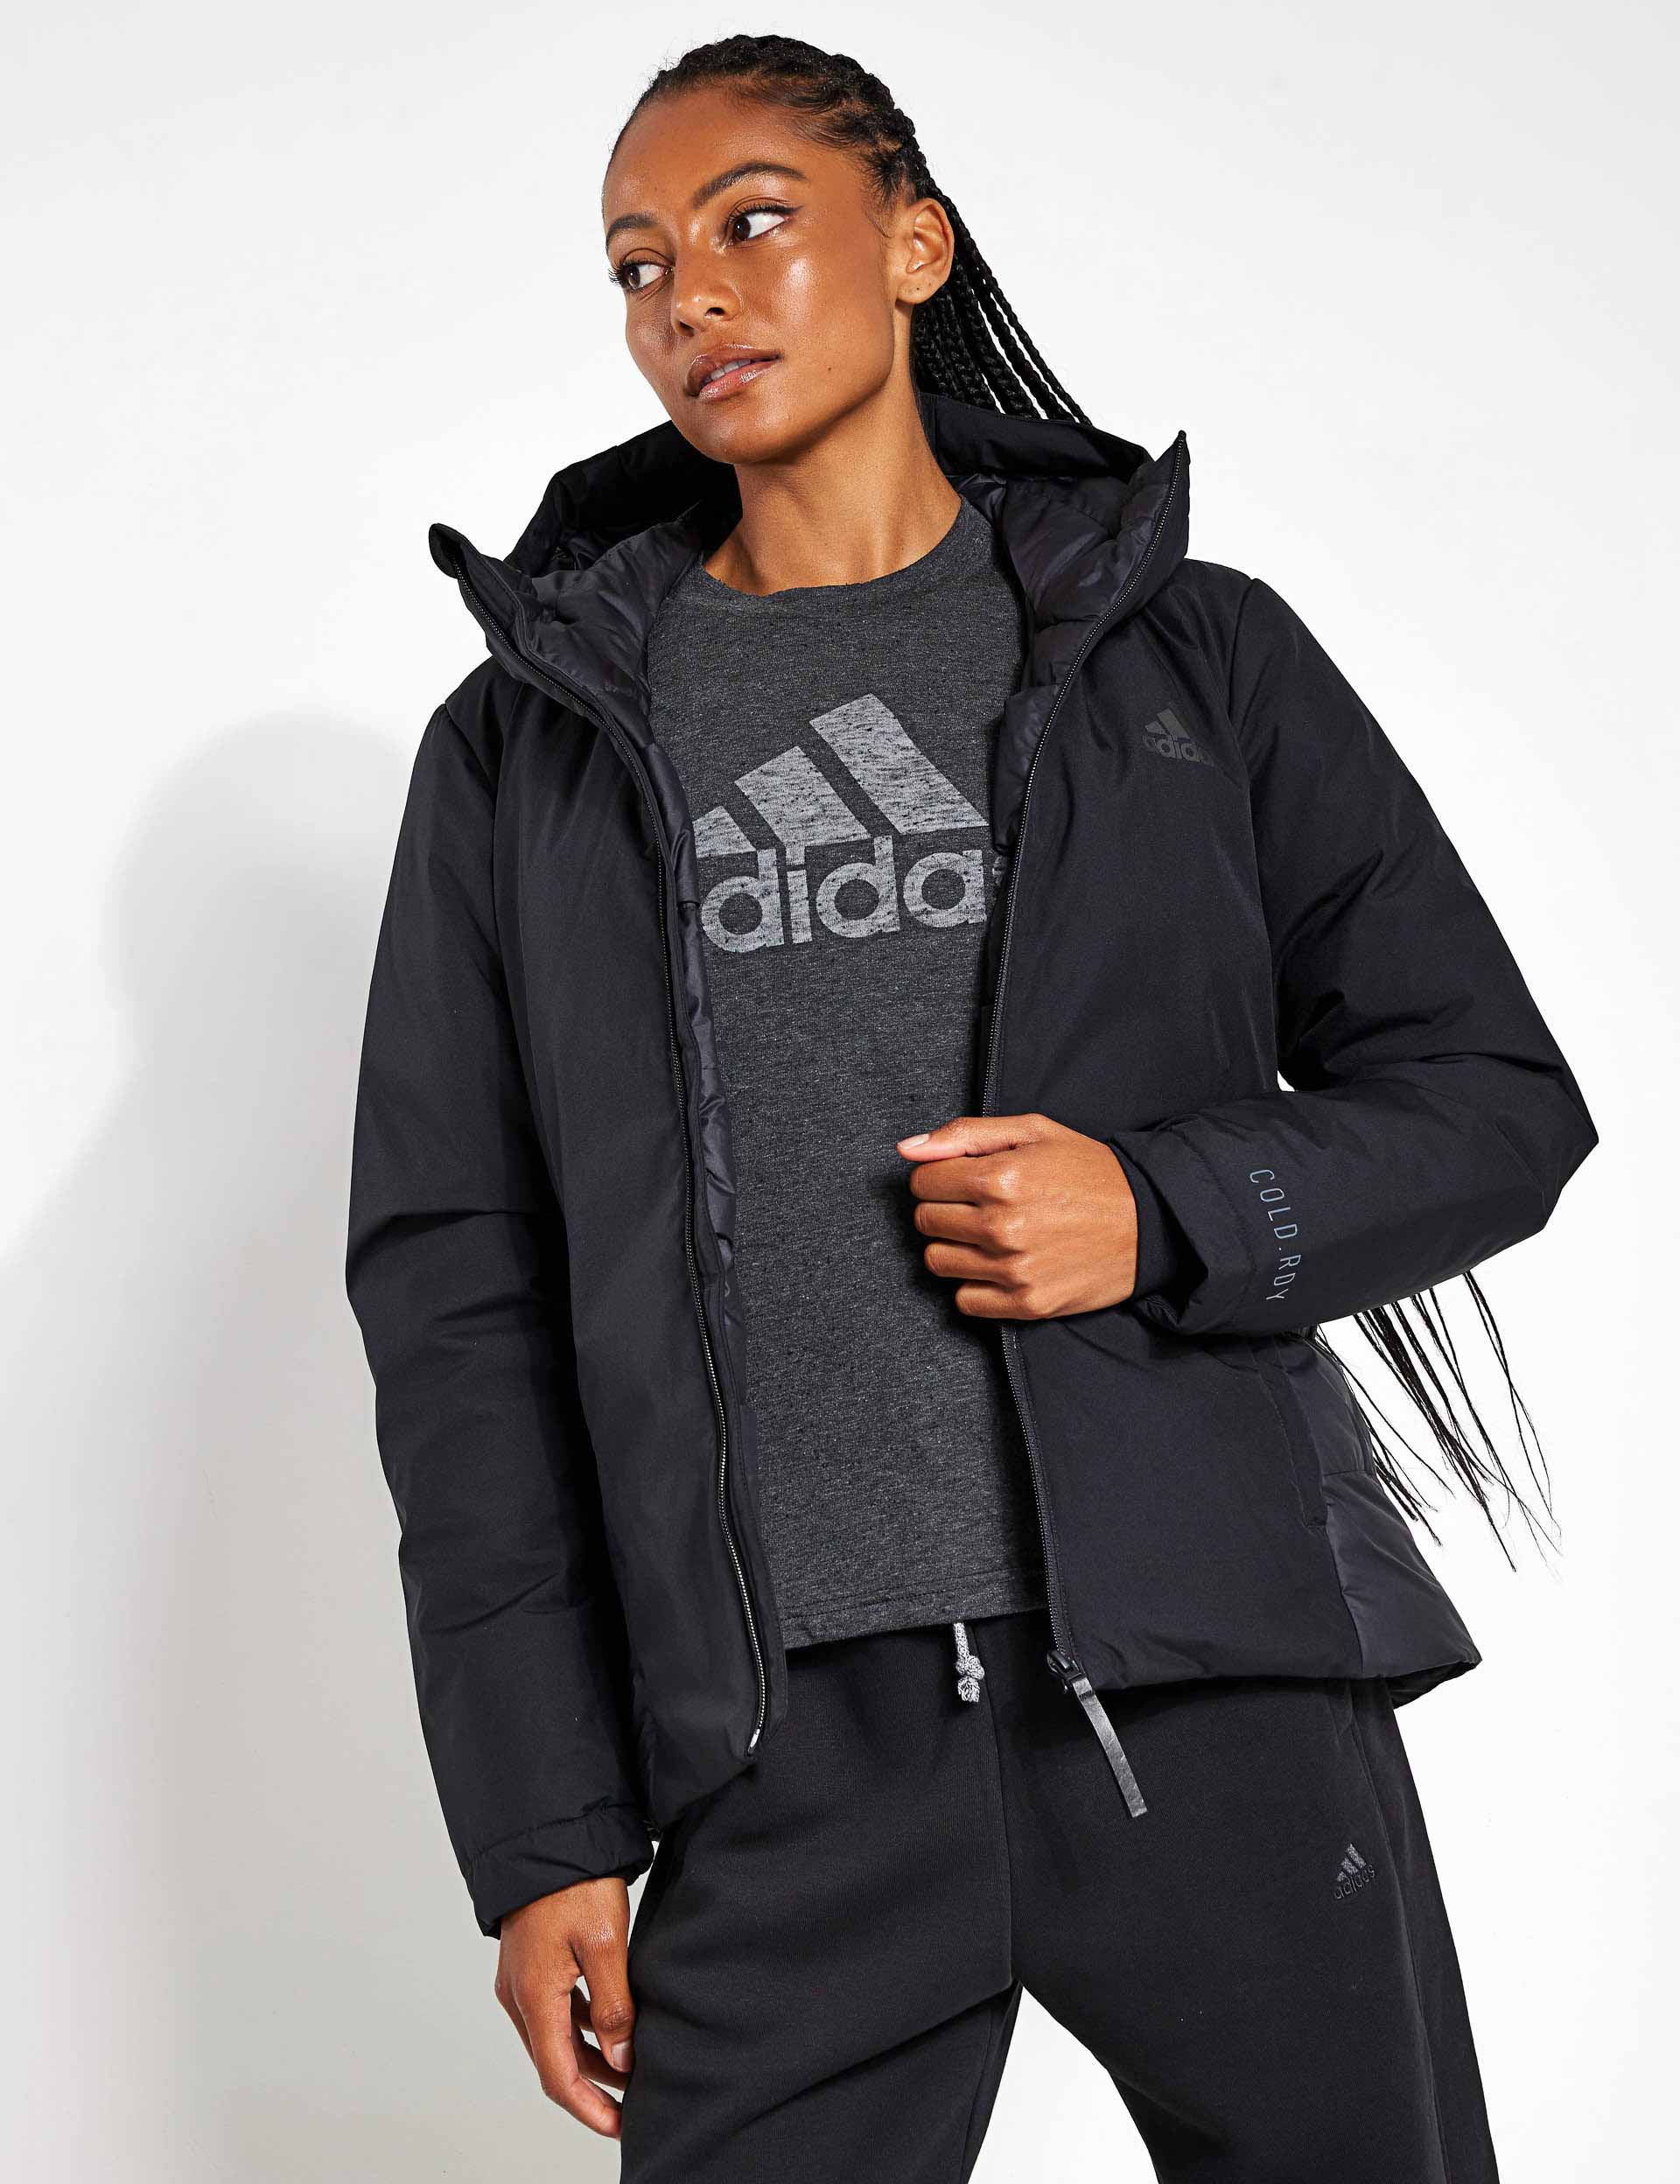 adidas | Traveer COLD.RDY Jacket - Black | The Sports Edit